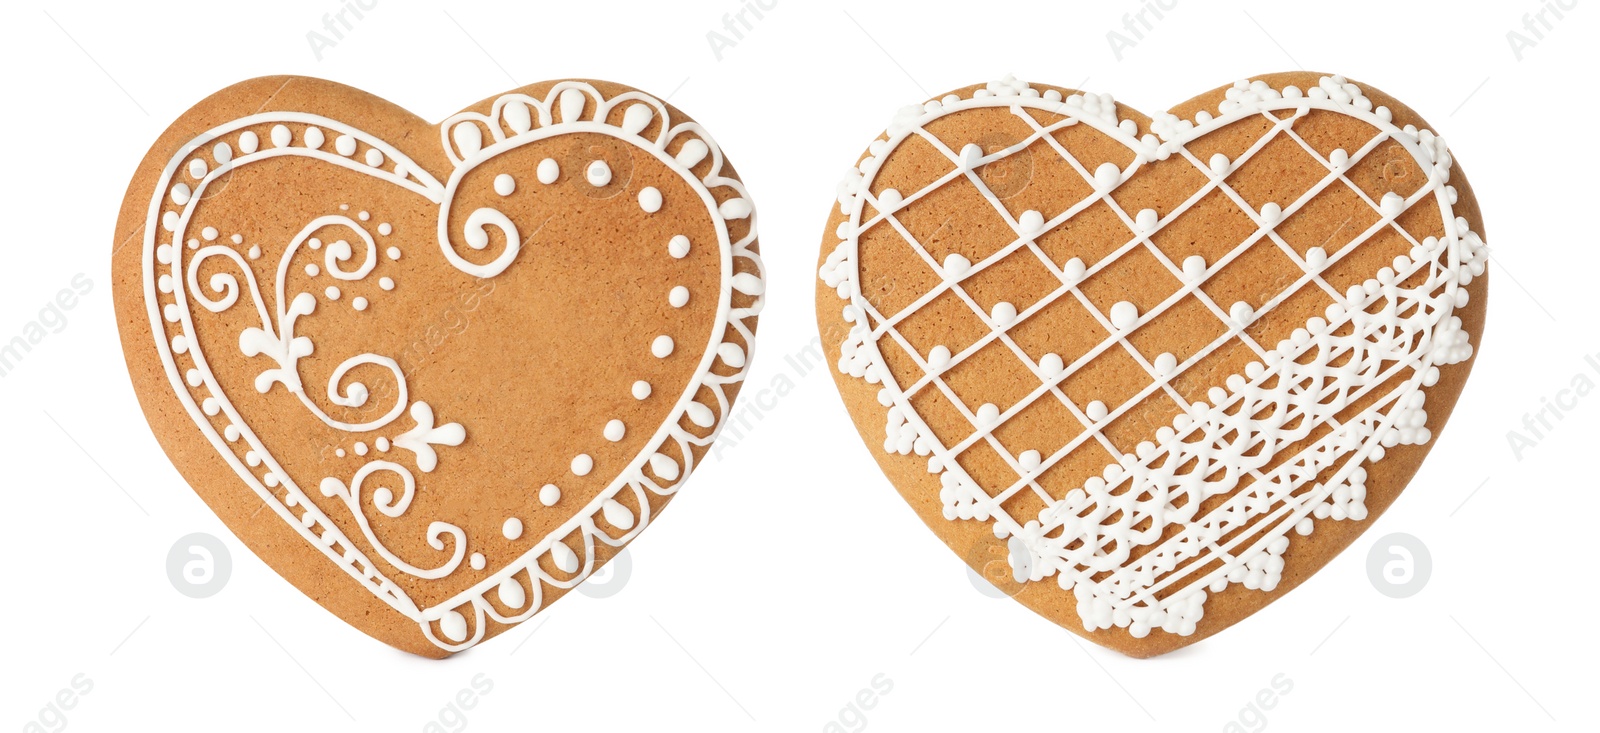 Image of Christmas gingerbread heart shaped cookies on white background, closeup. Banner design